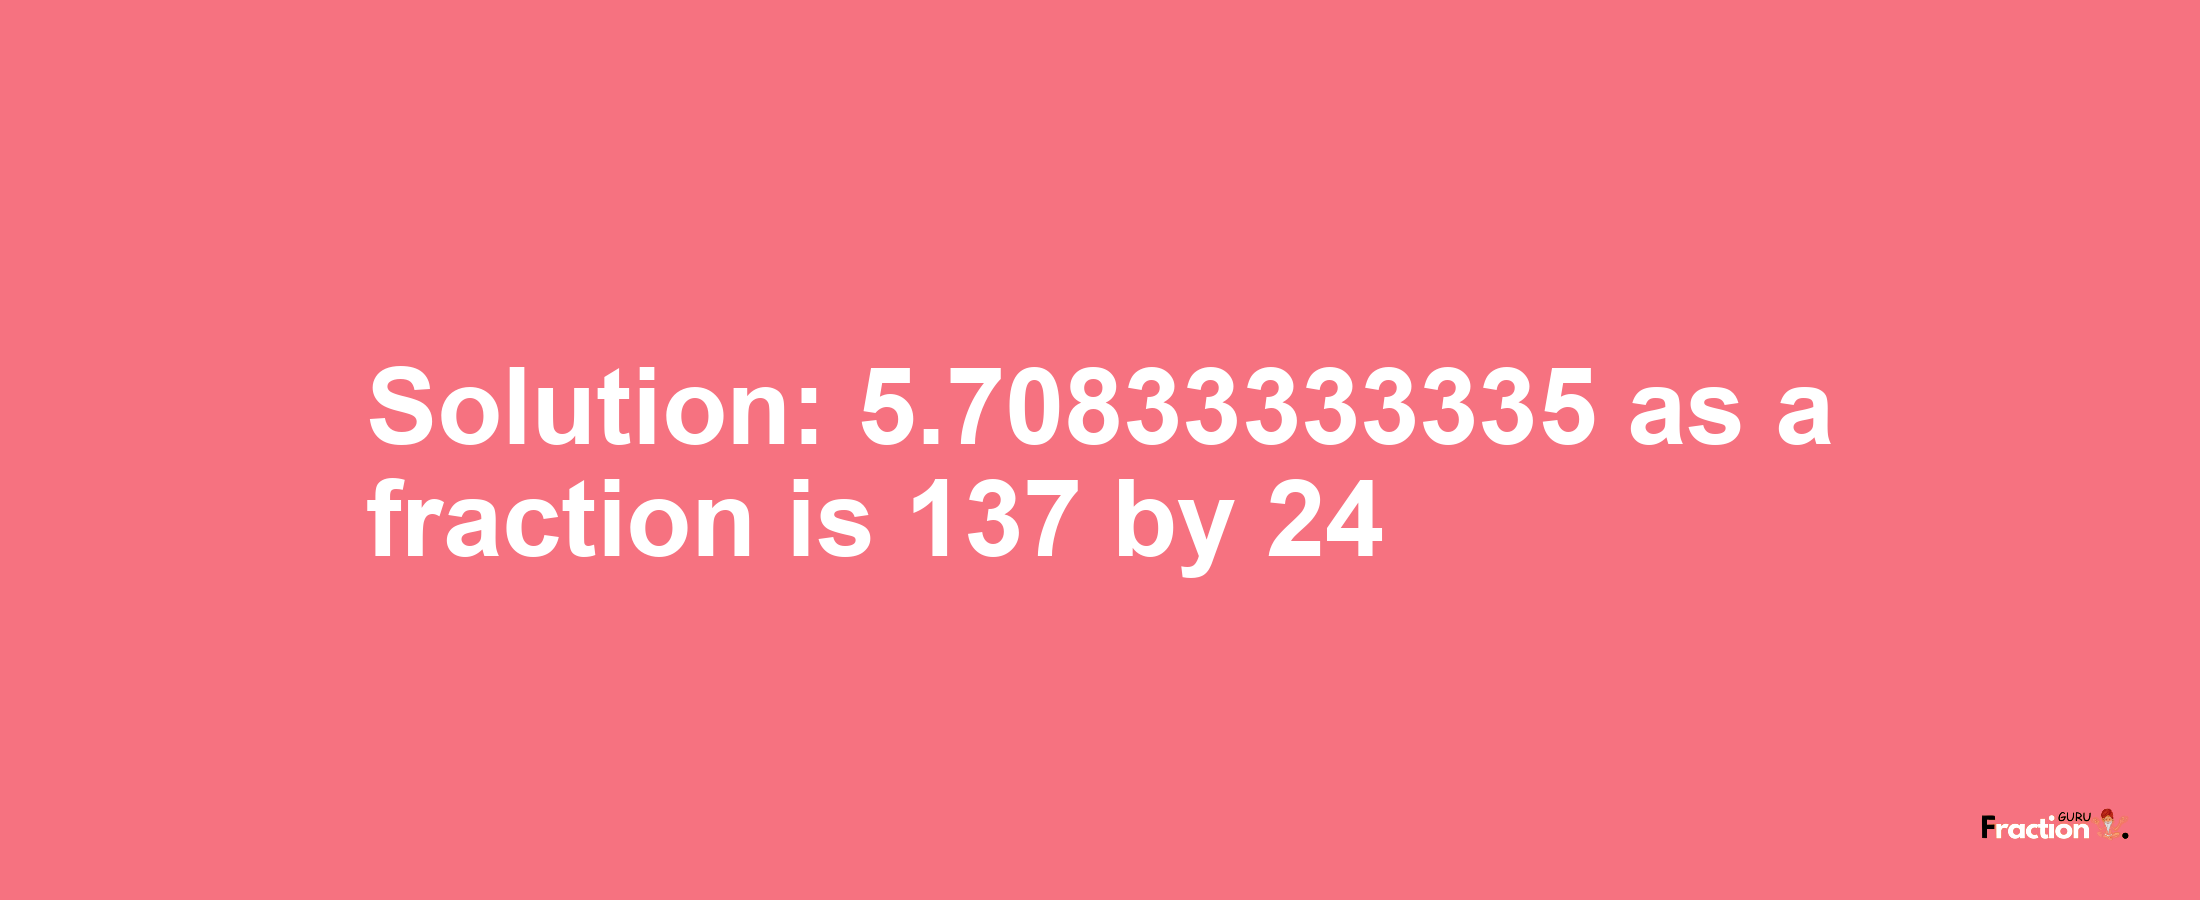 Solution:5.70833333335 as a fraction is 137/24